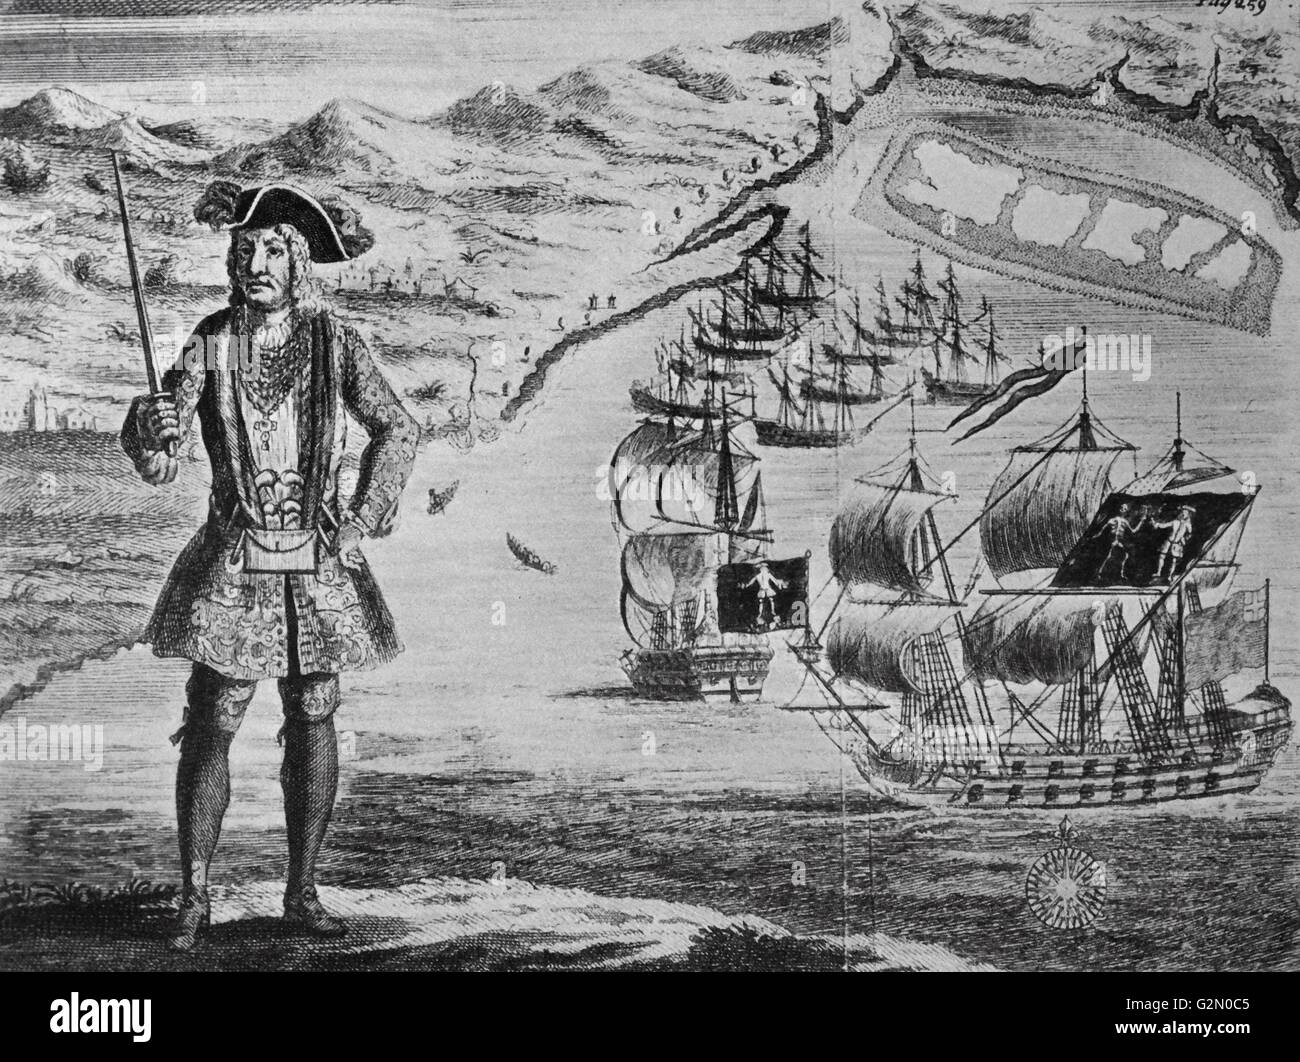 Bartholomew Roberts with his ship and captured merchant ships in the background. A copper engraving from A History of the Pyrates by Captain Charles Johnson c. 1724. Bartholomew Roberts (17 May 1682 – 10 February 1722), born John Roberts, was a Welsh pirate who raided ships off the Americas and West Africa between 1719 and 1722 Stock Photo